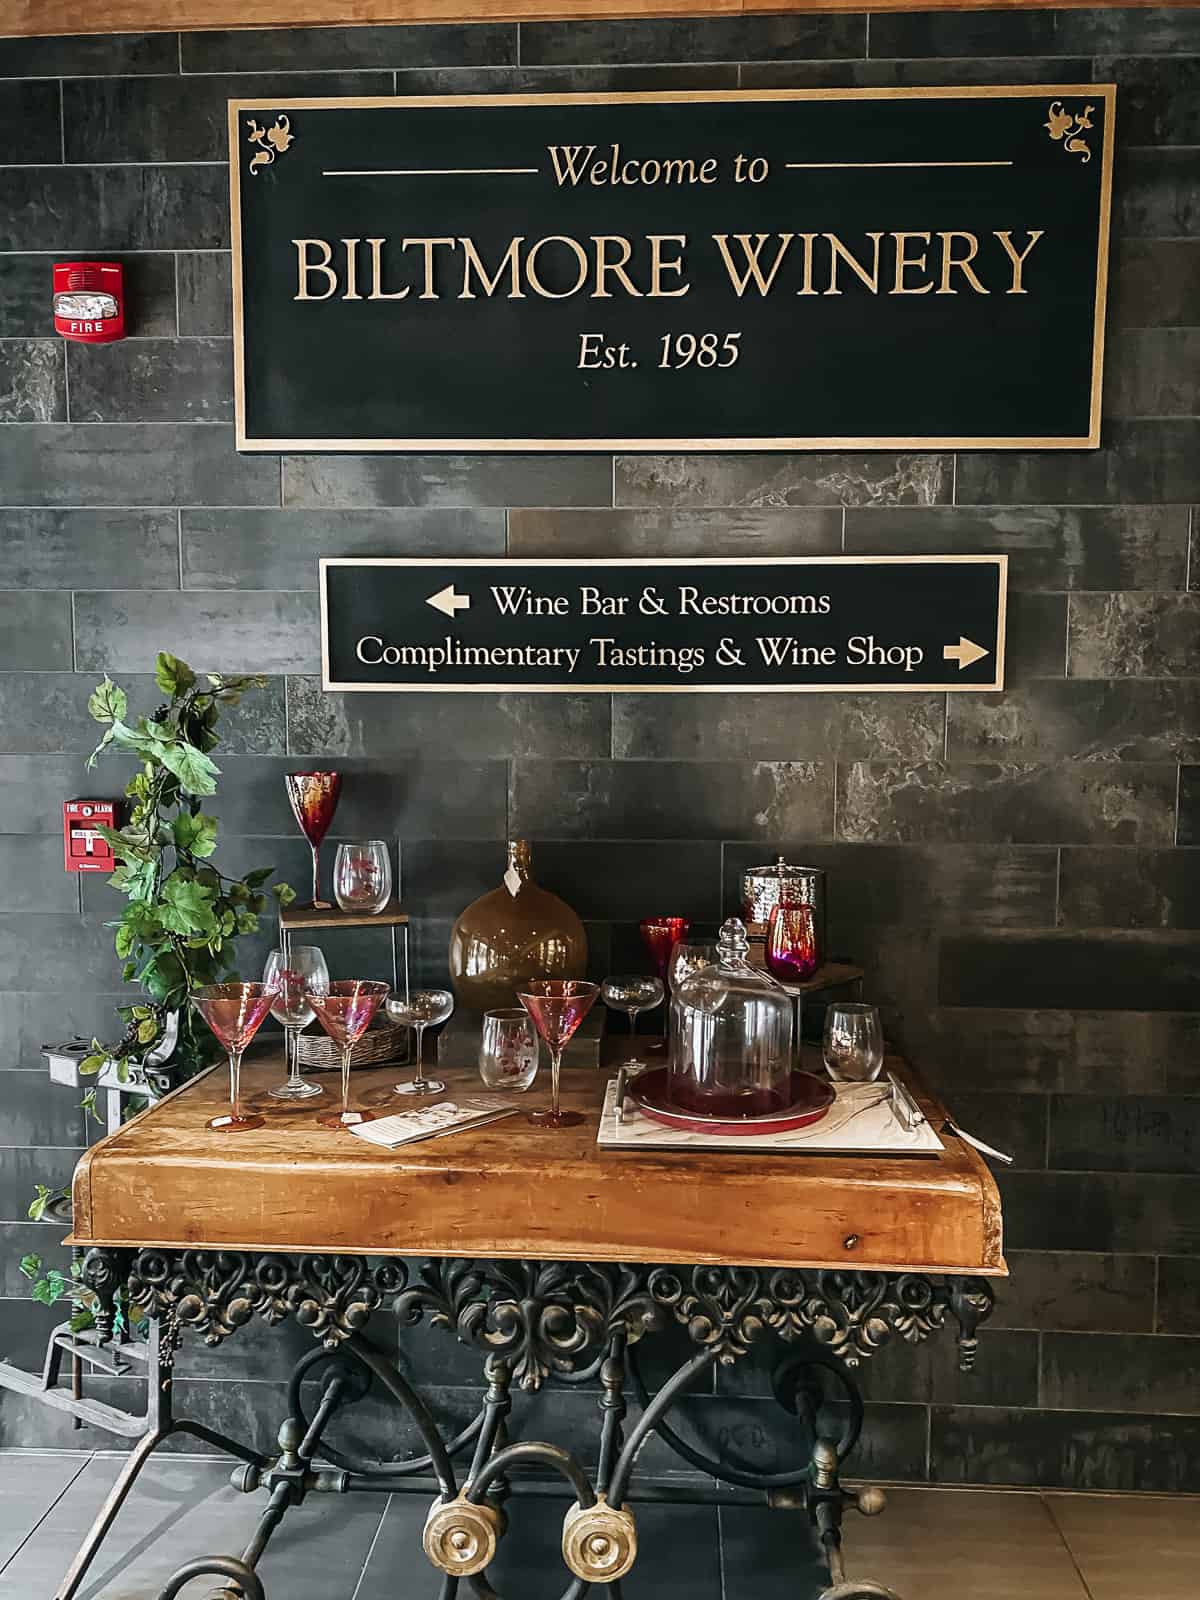 A black sign on a wall for the Biltmore Winery with martini glasses on a table below it